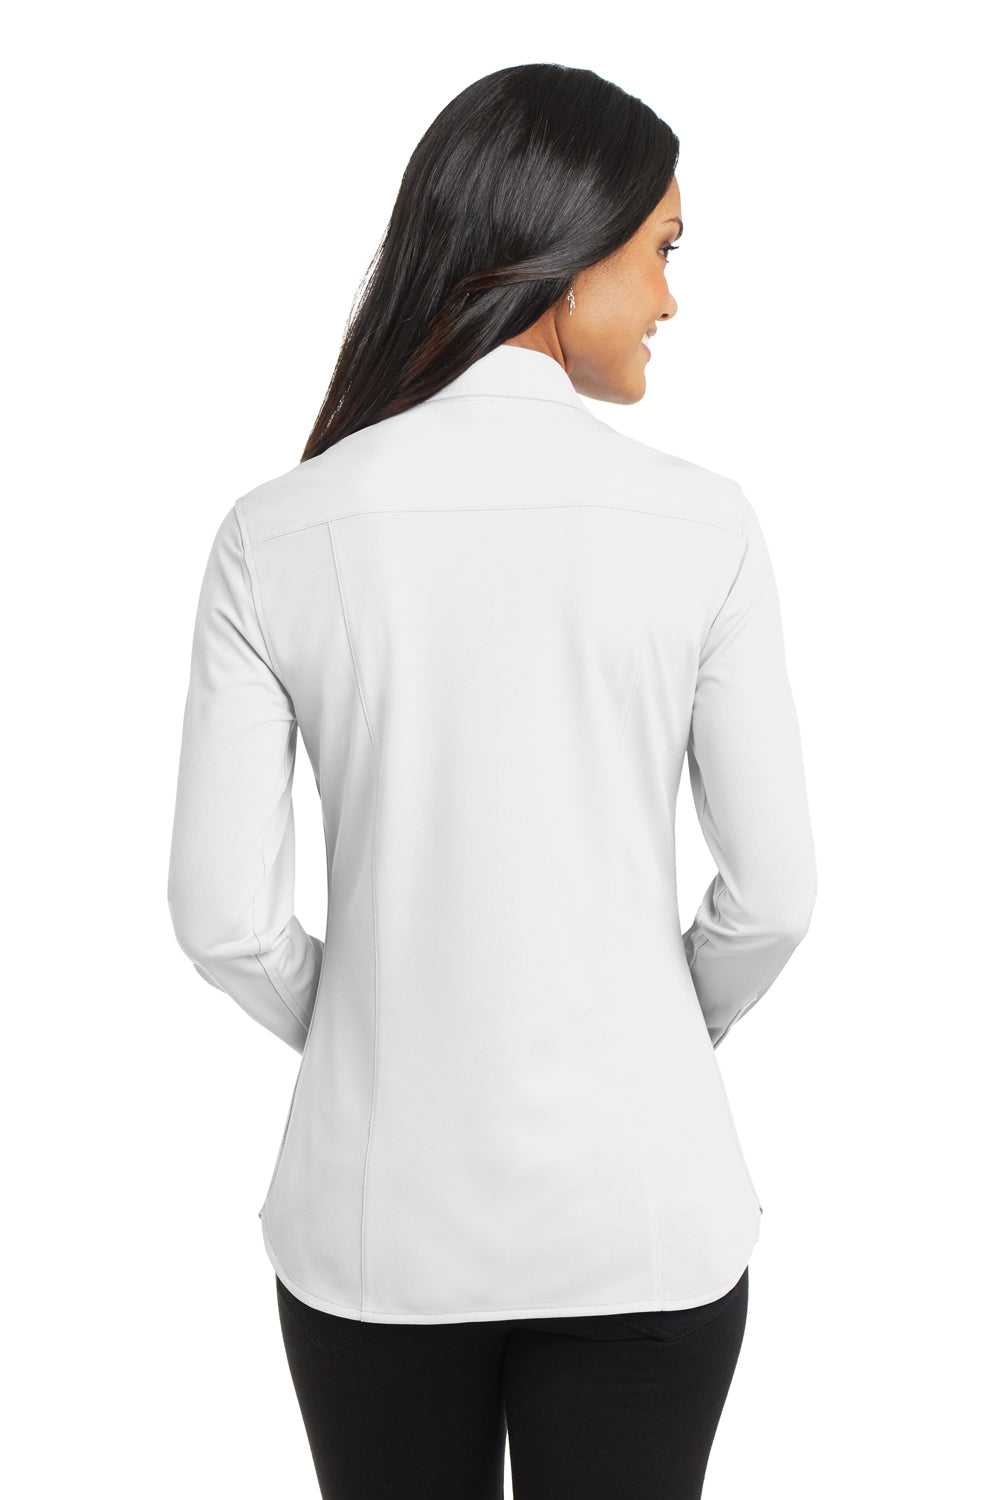 Port Authority L570 Womens Dimension Moisture Wicking Long Sleeve Button Down Shirt White Back